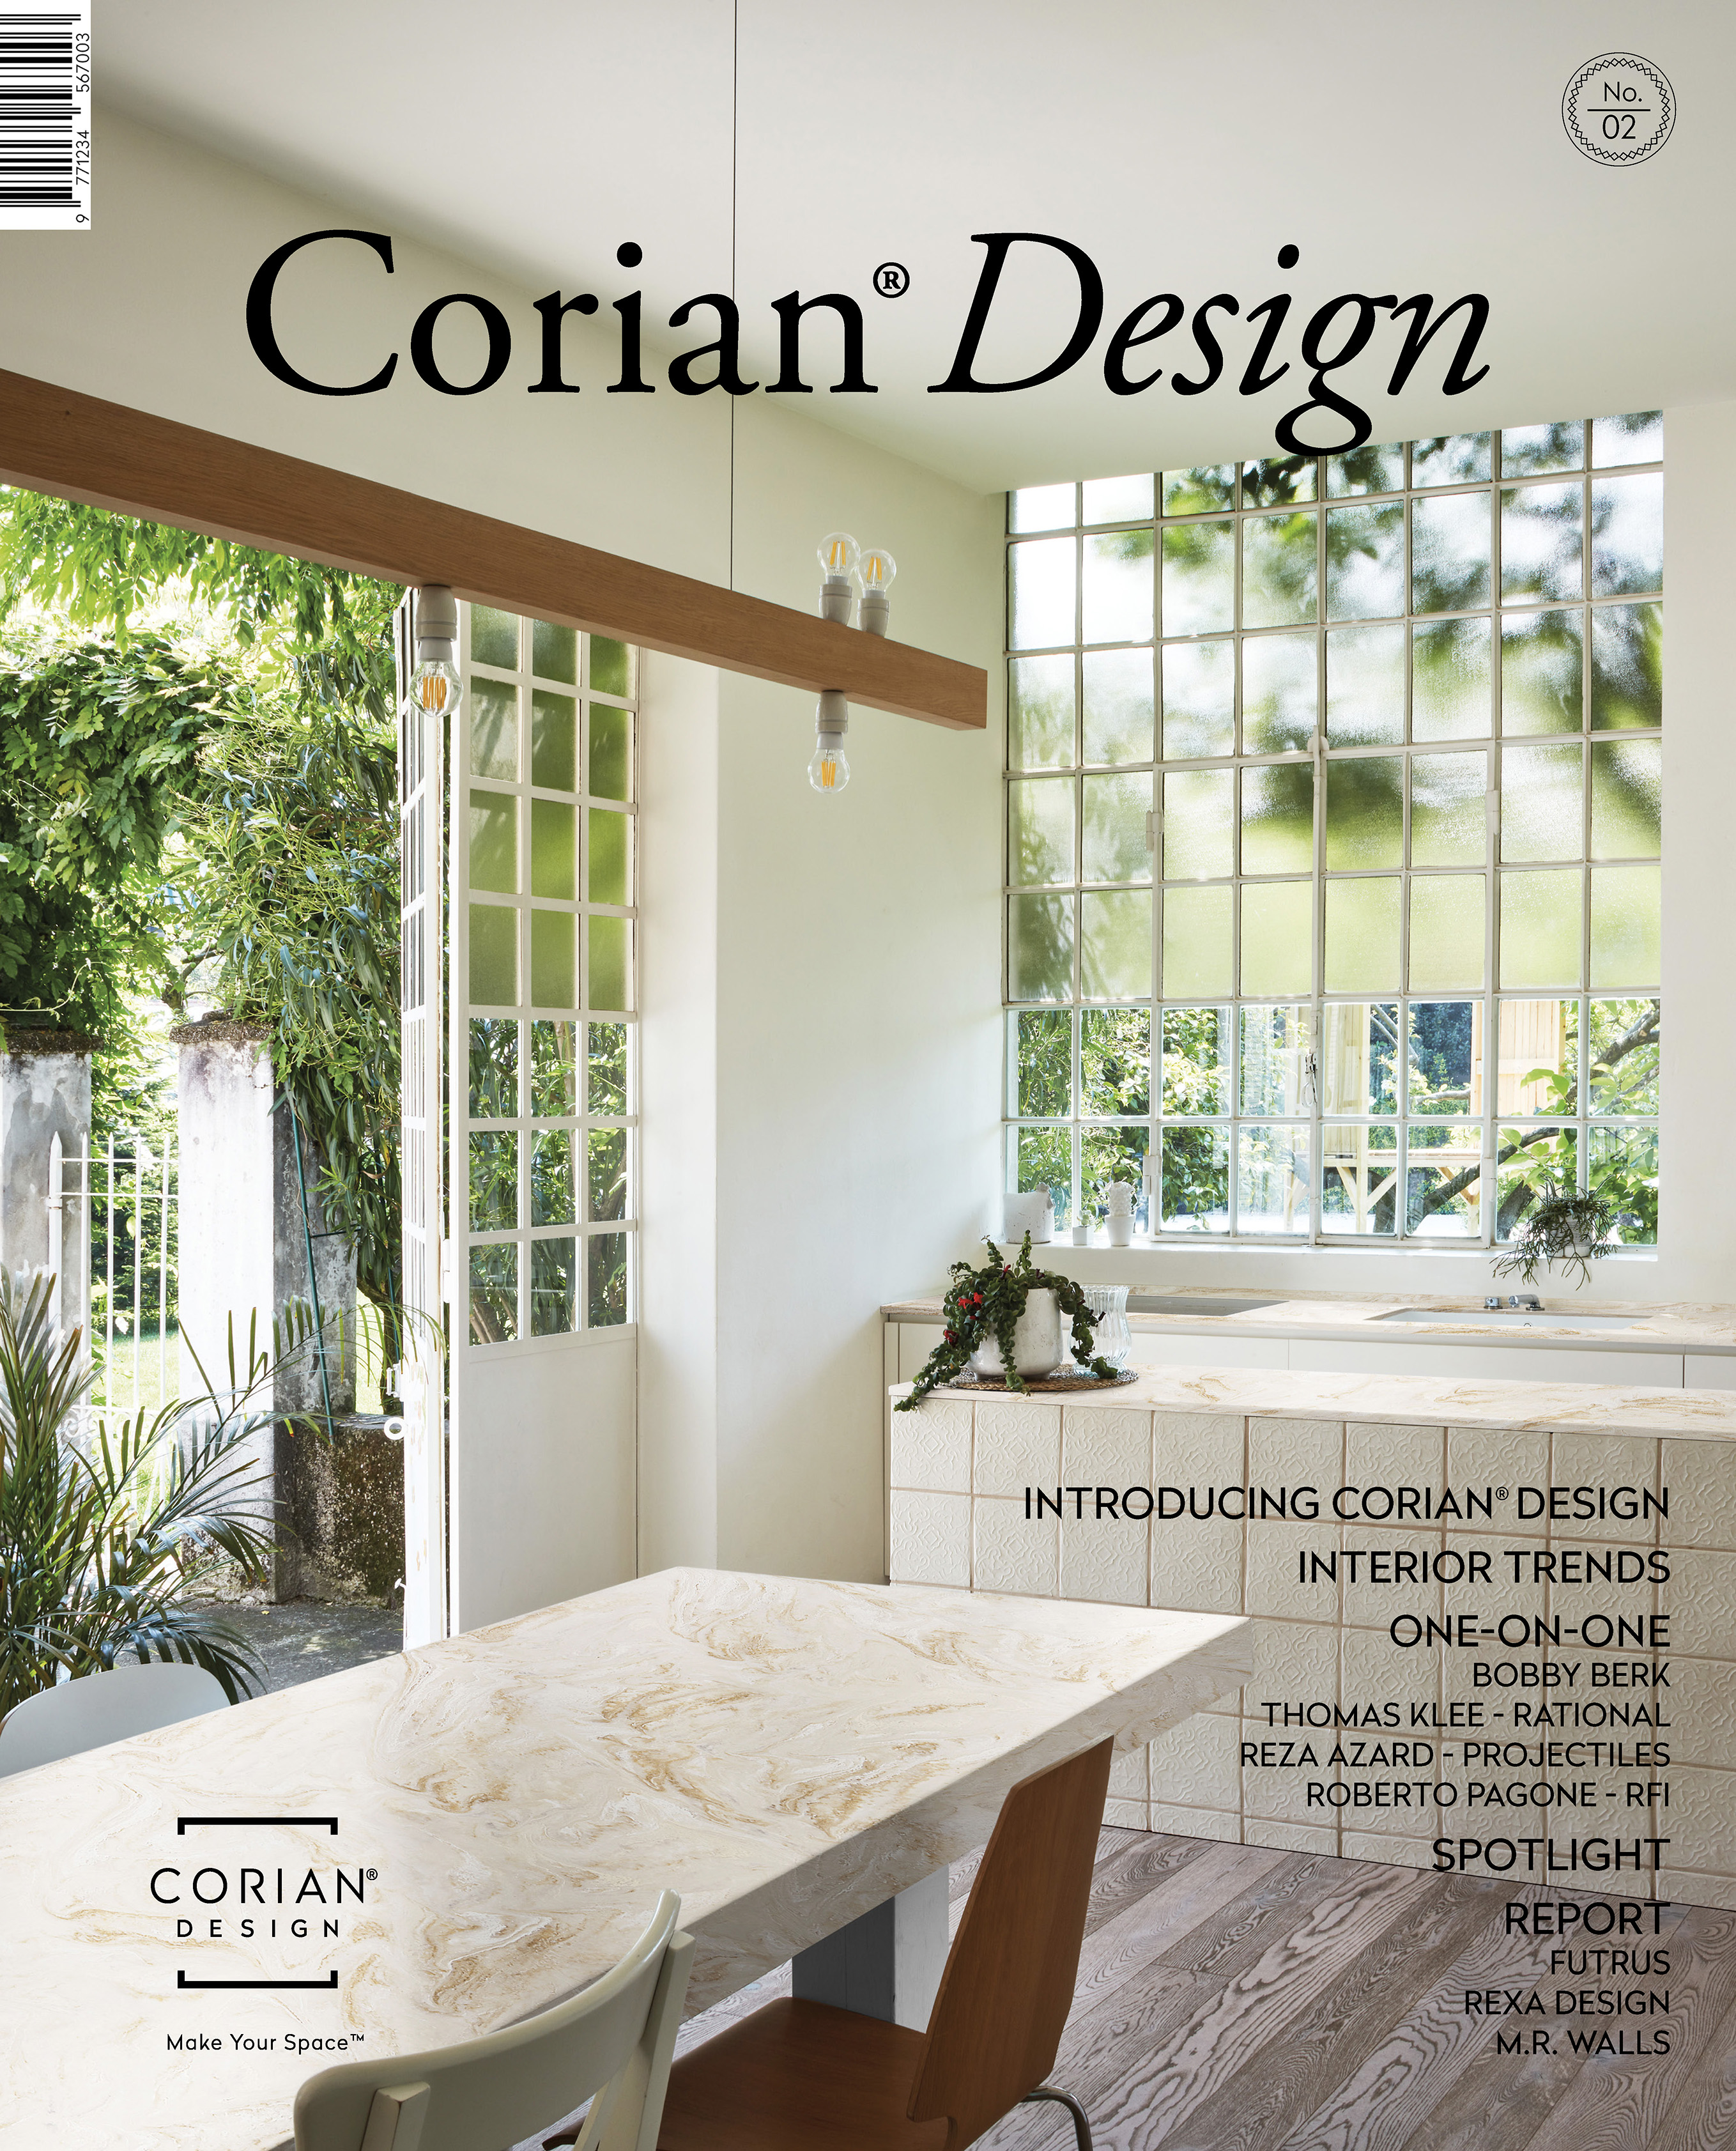 Dupont Launches The Second Issue Of Its Global Corian